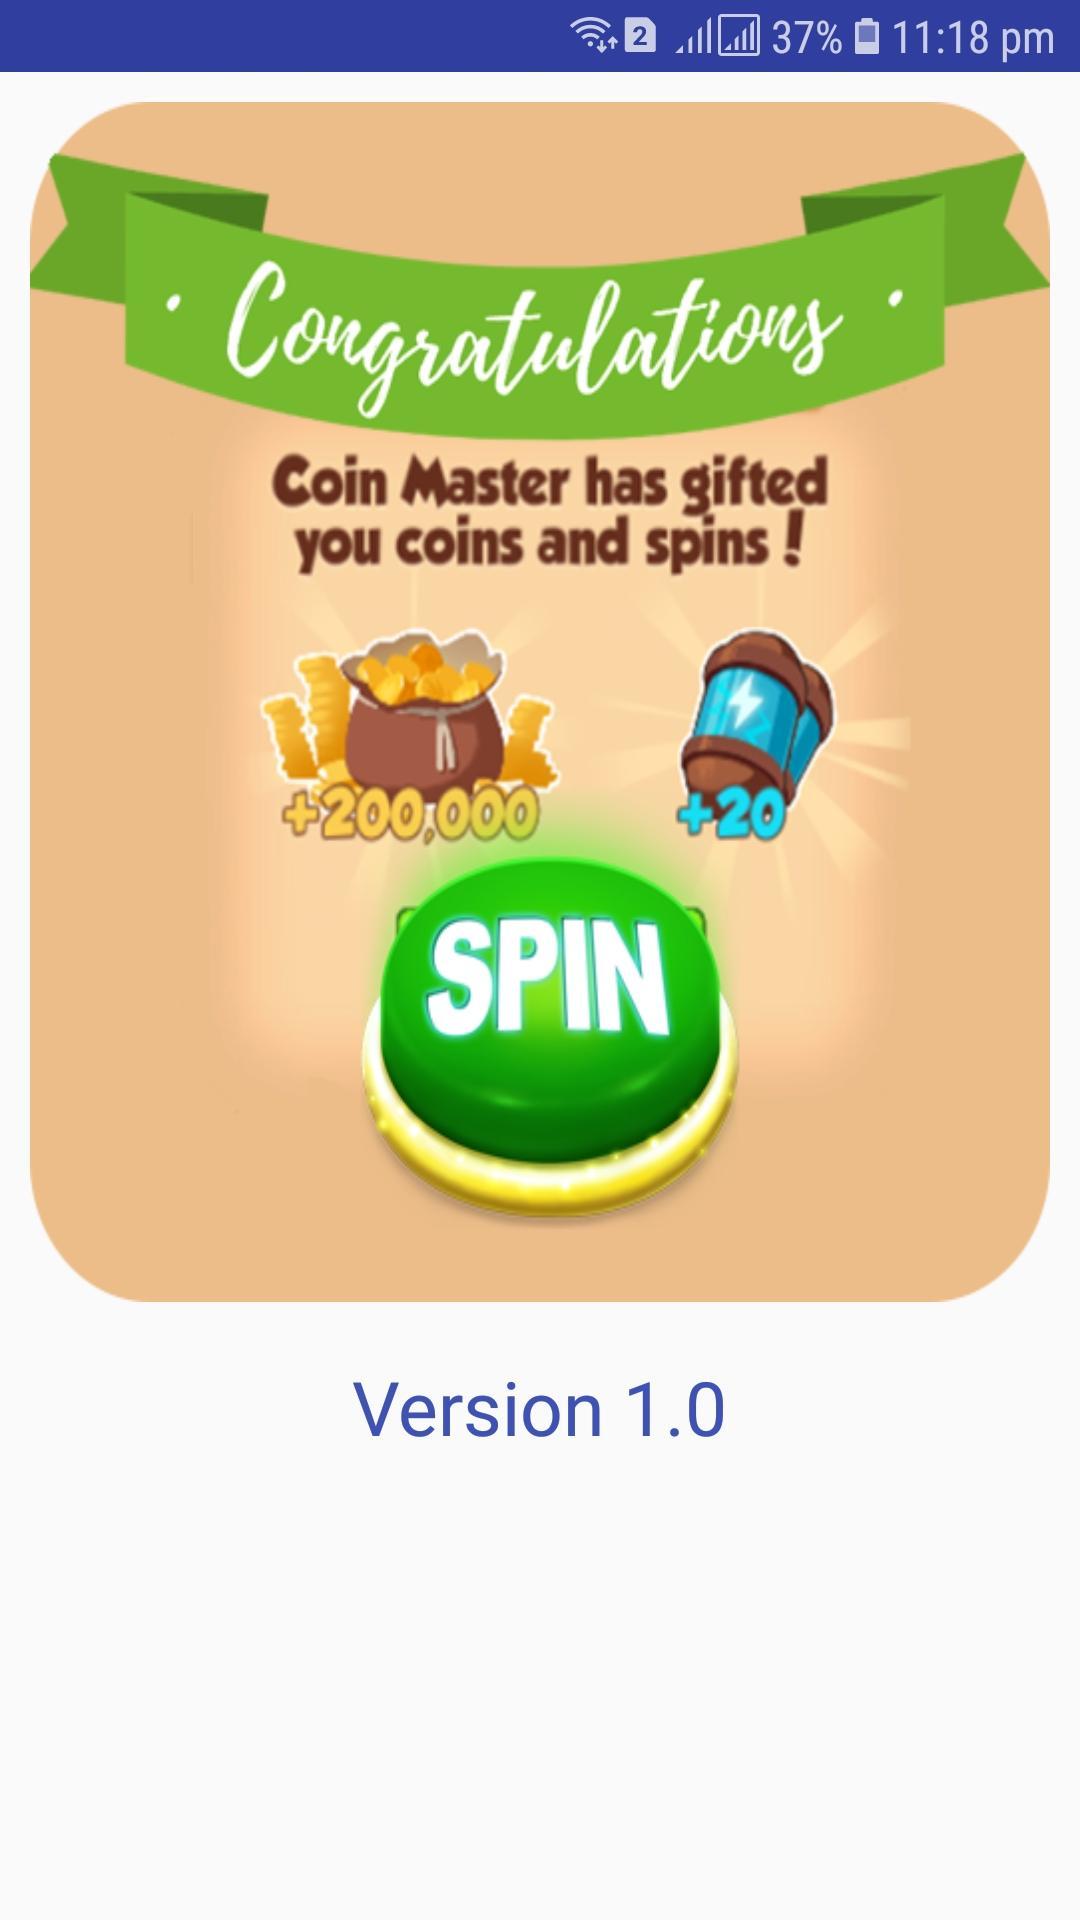 Update] Coinmaster.Services Coin Master Free Spins Whatsapp Group ... - 